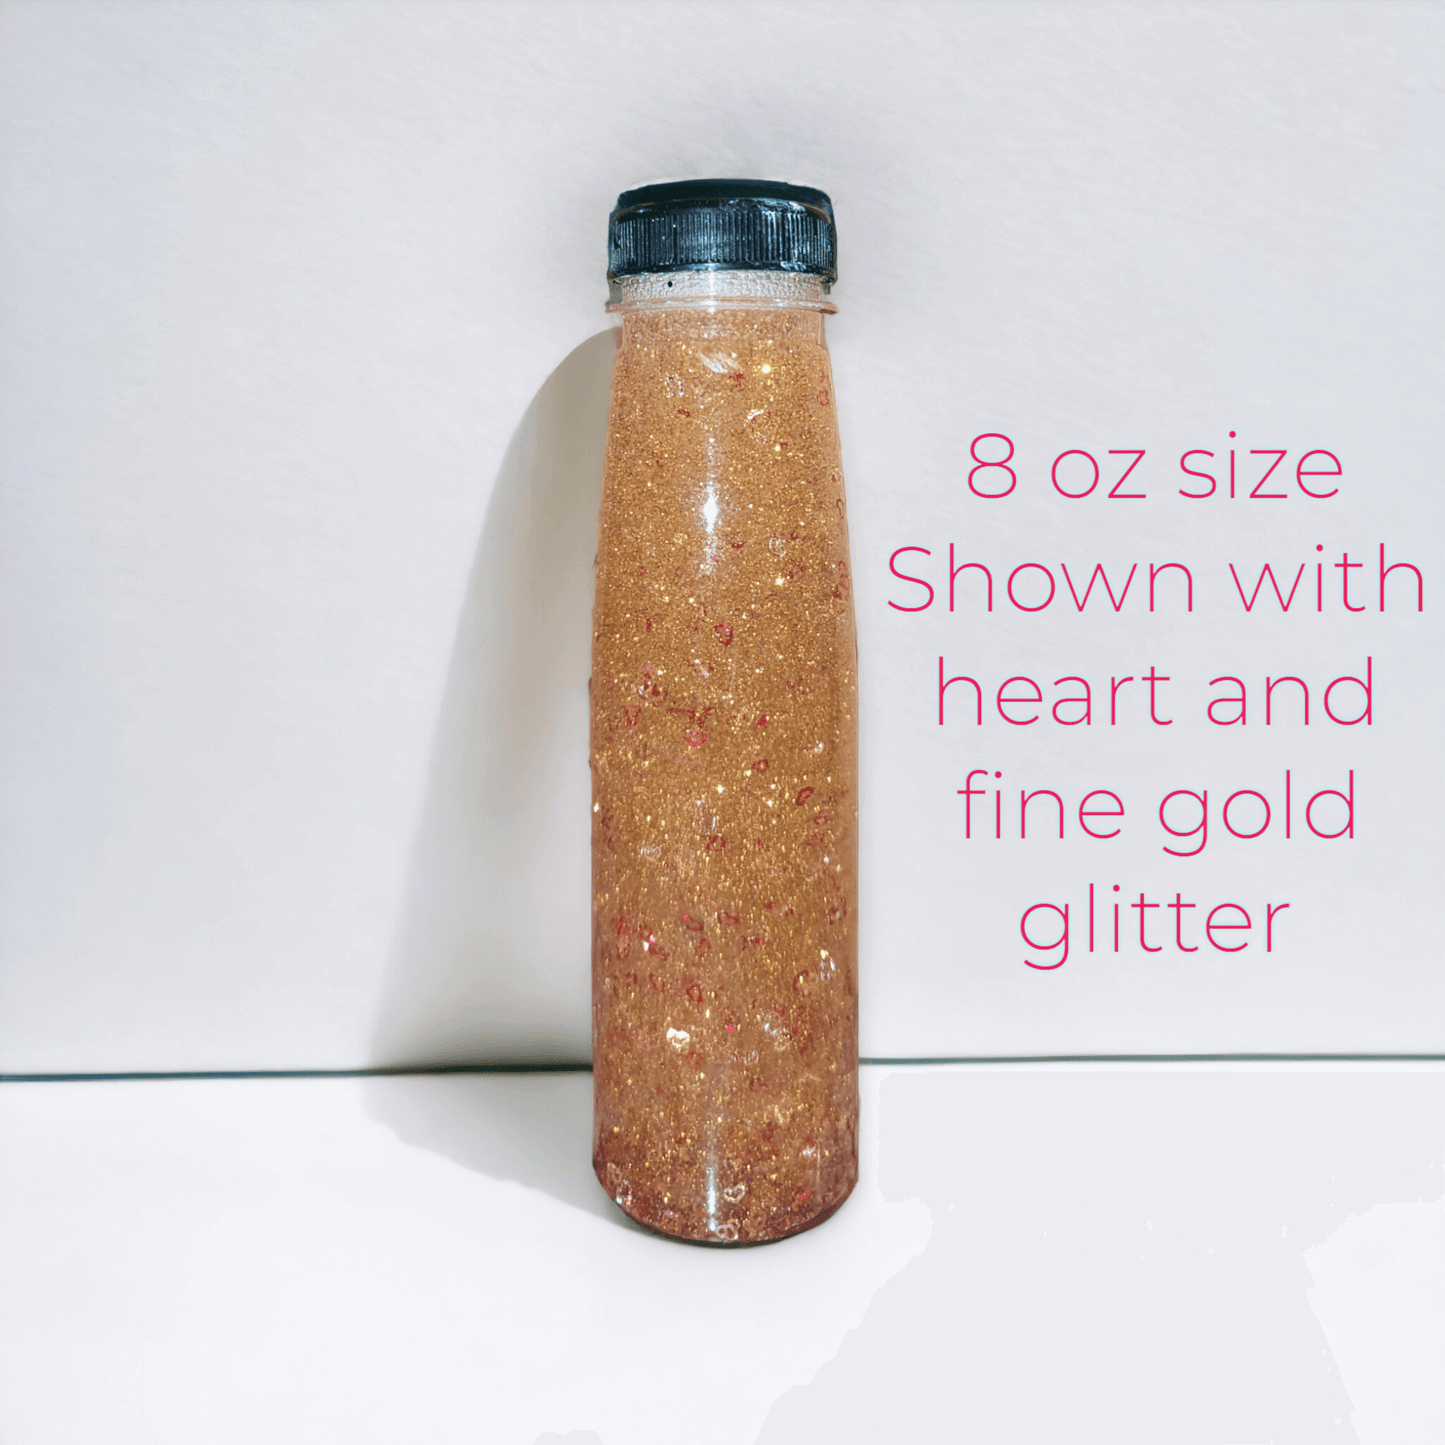 9 oz glitter bottle with gold glitter and heart shapes 